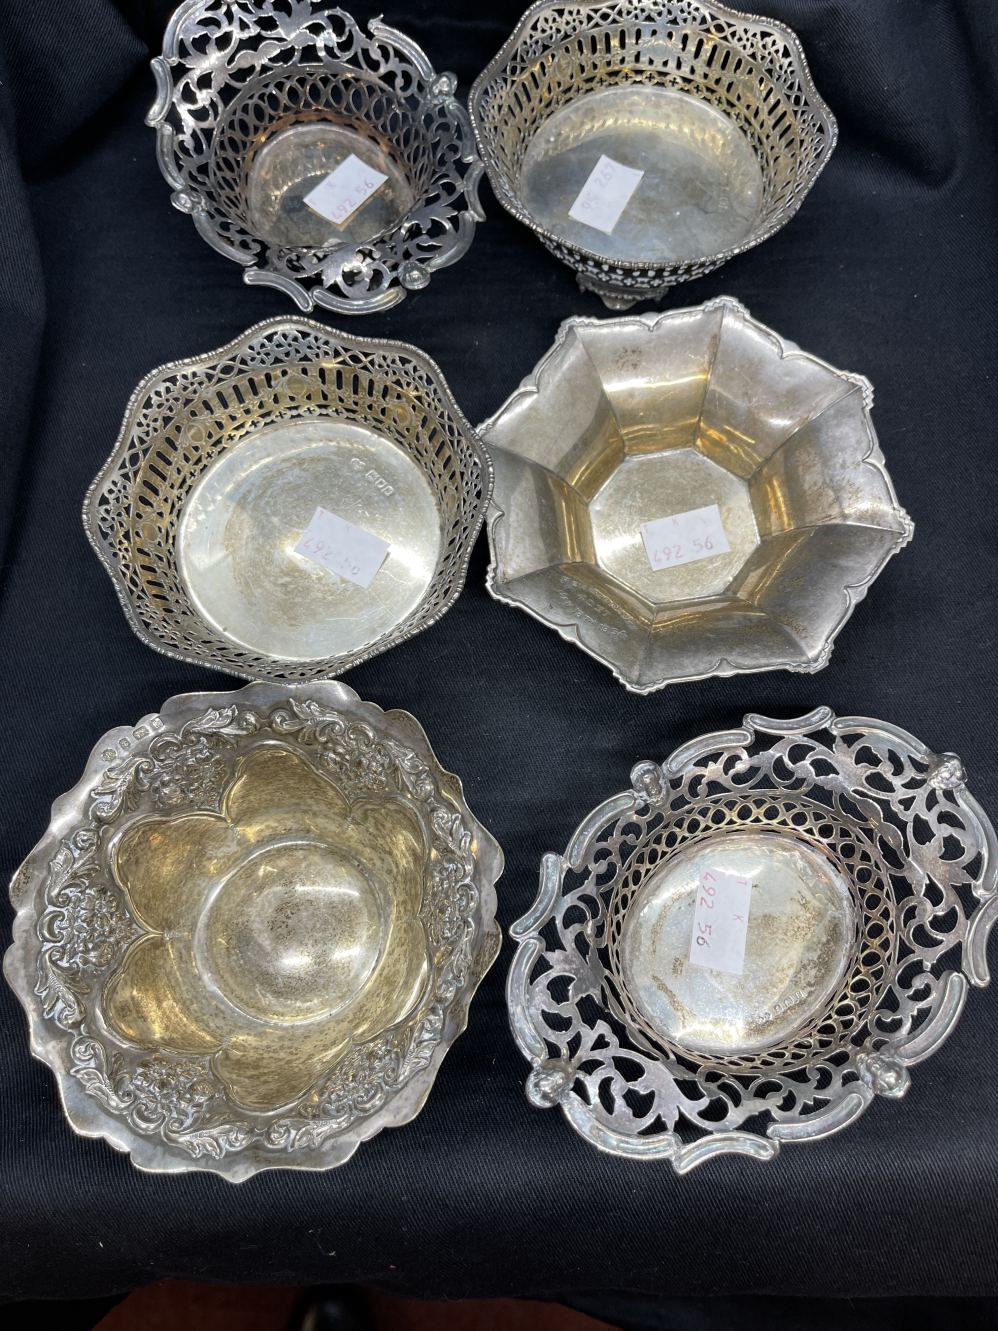 Hallmarked Silver: Collection of bon bon dishes, various patterns and hallmarks. Total weight 14.